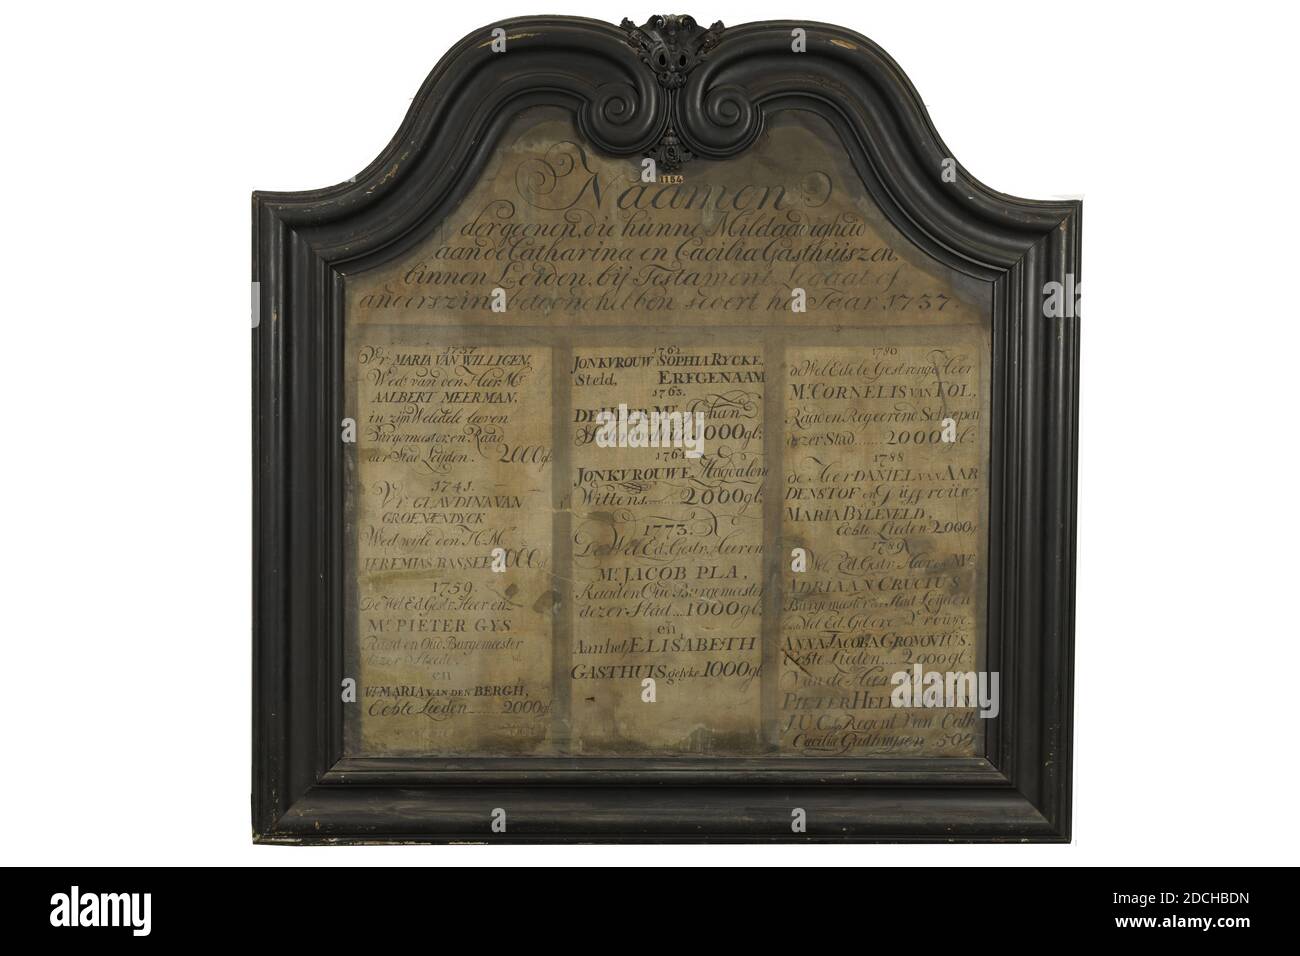 list of names, Anonymous, 1737-1789, canvas, wood, oil paint, The names of the patrons of the St. Catharina and Caecilia guesthouse, 1737-1789, painted on canvas, divided into three columns. The canvas is placed on a panel in a profiled frame with two s-shaped arches at the top that converge towards the middle and each end in a volute. Above it a padding of acanthus leaf and below it a vine with grapes. At the back of the frame on iron brackets two iron chains with links and a ring to hang the frame, With frame: 230 x 234 x 13cm (2300 x 2340 x 130mm Stock Photo